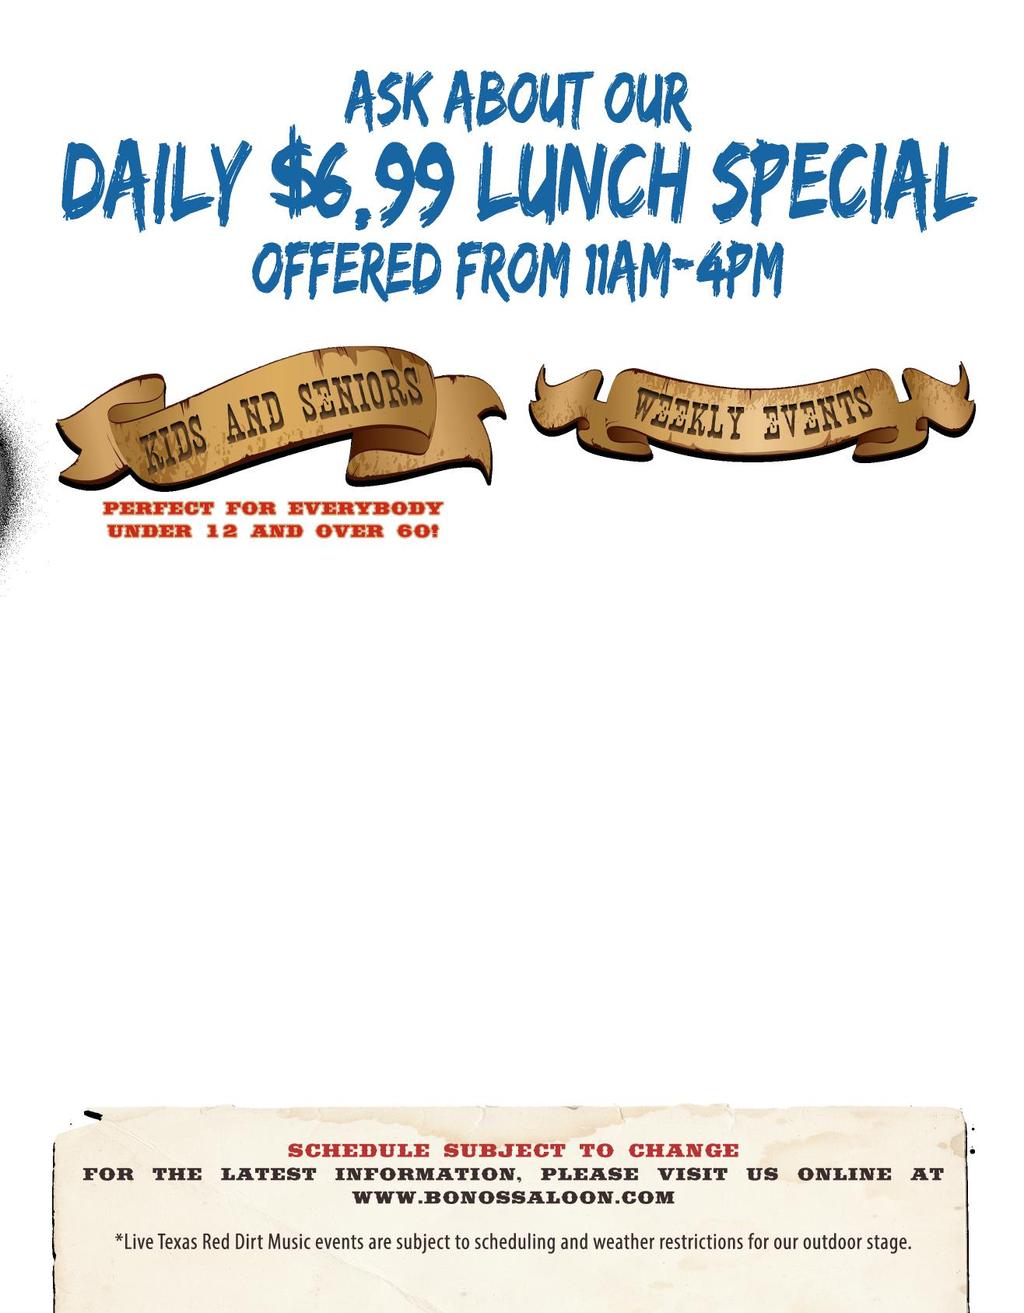 all meals served with hand cut french fries 4.99 everyday except sundays - when kids eat free! (Restrictions apply) Kid s Drink.99 GRILLED CHEESE HAMBURGER Add a slice of cheese for.50 extra.